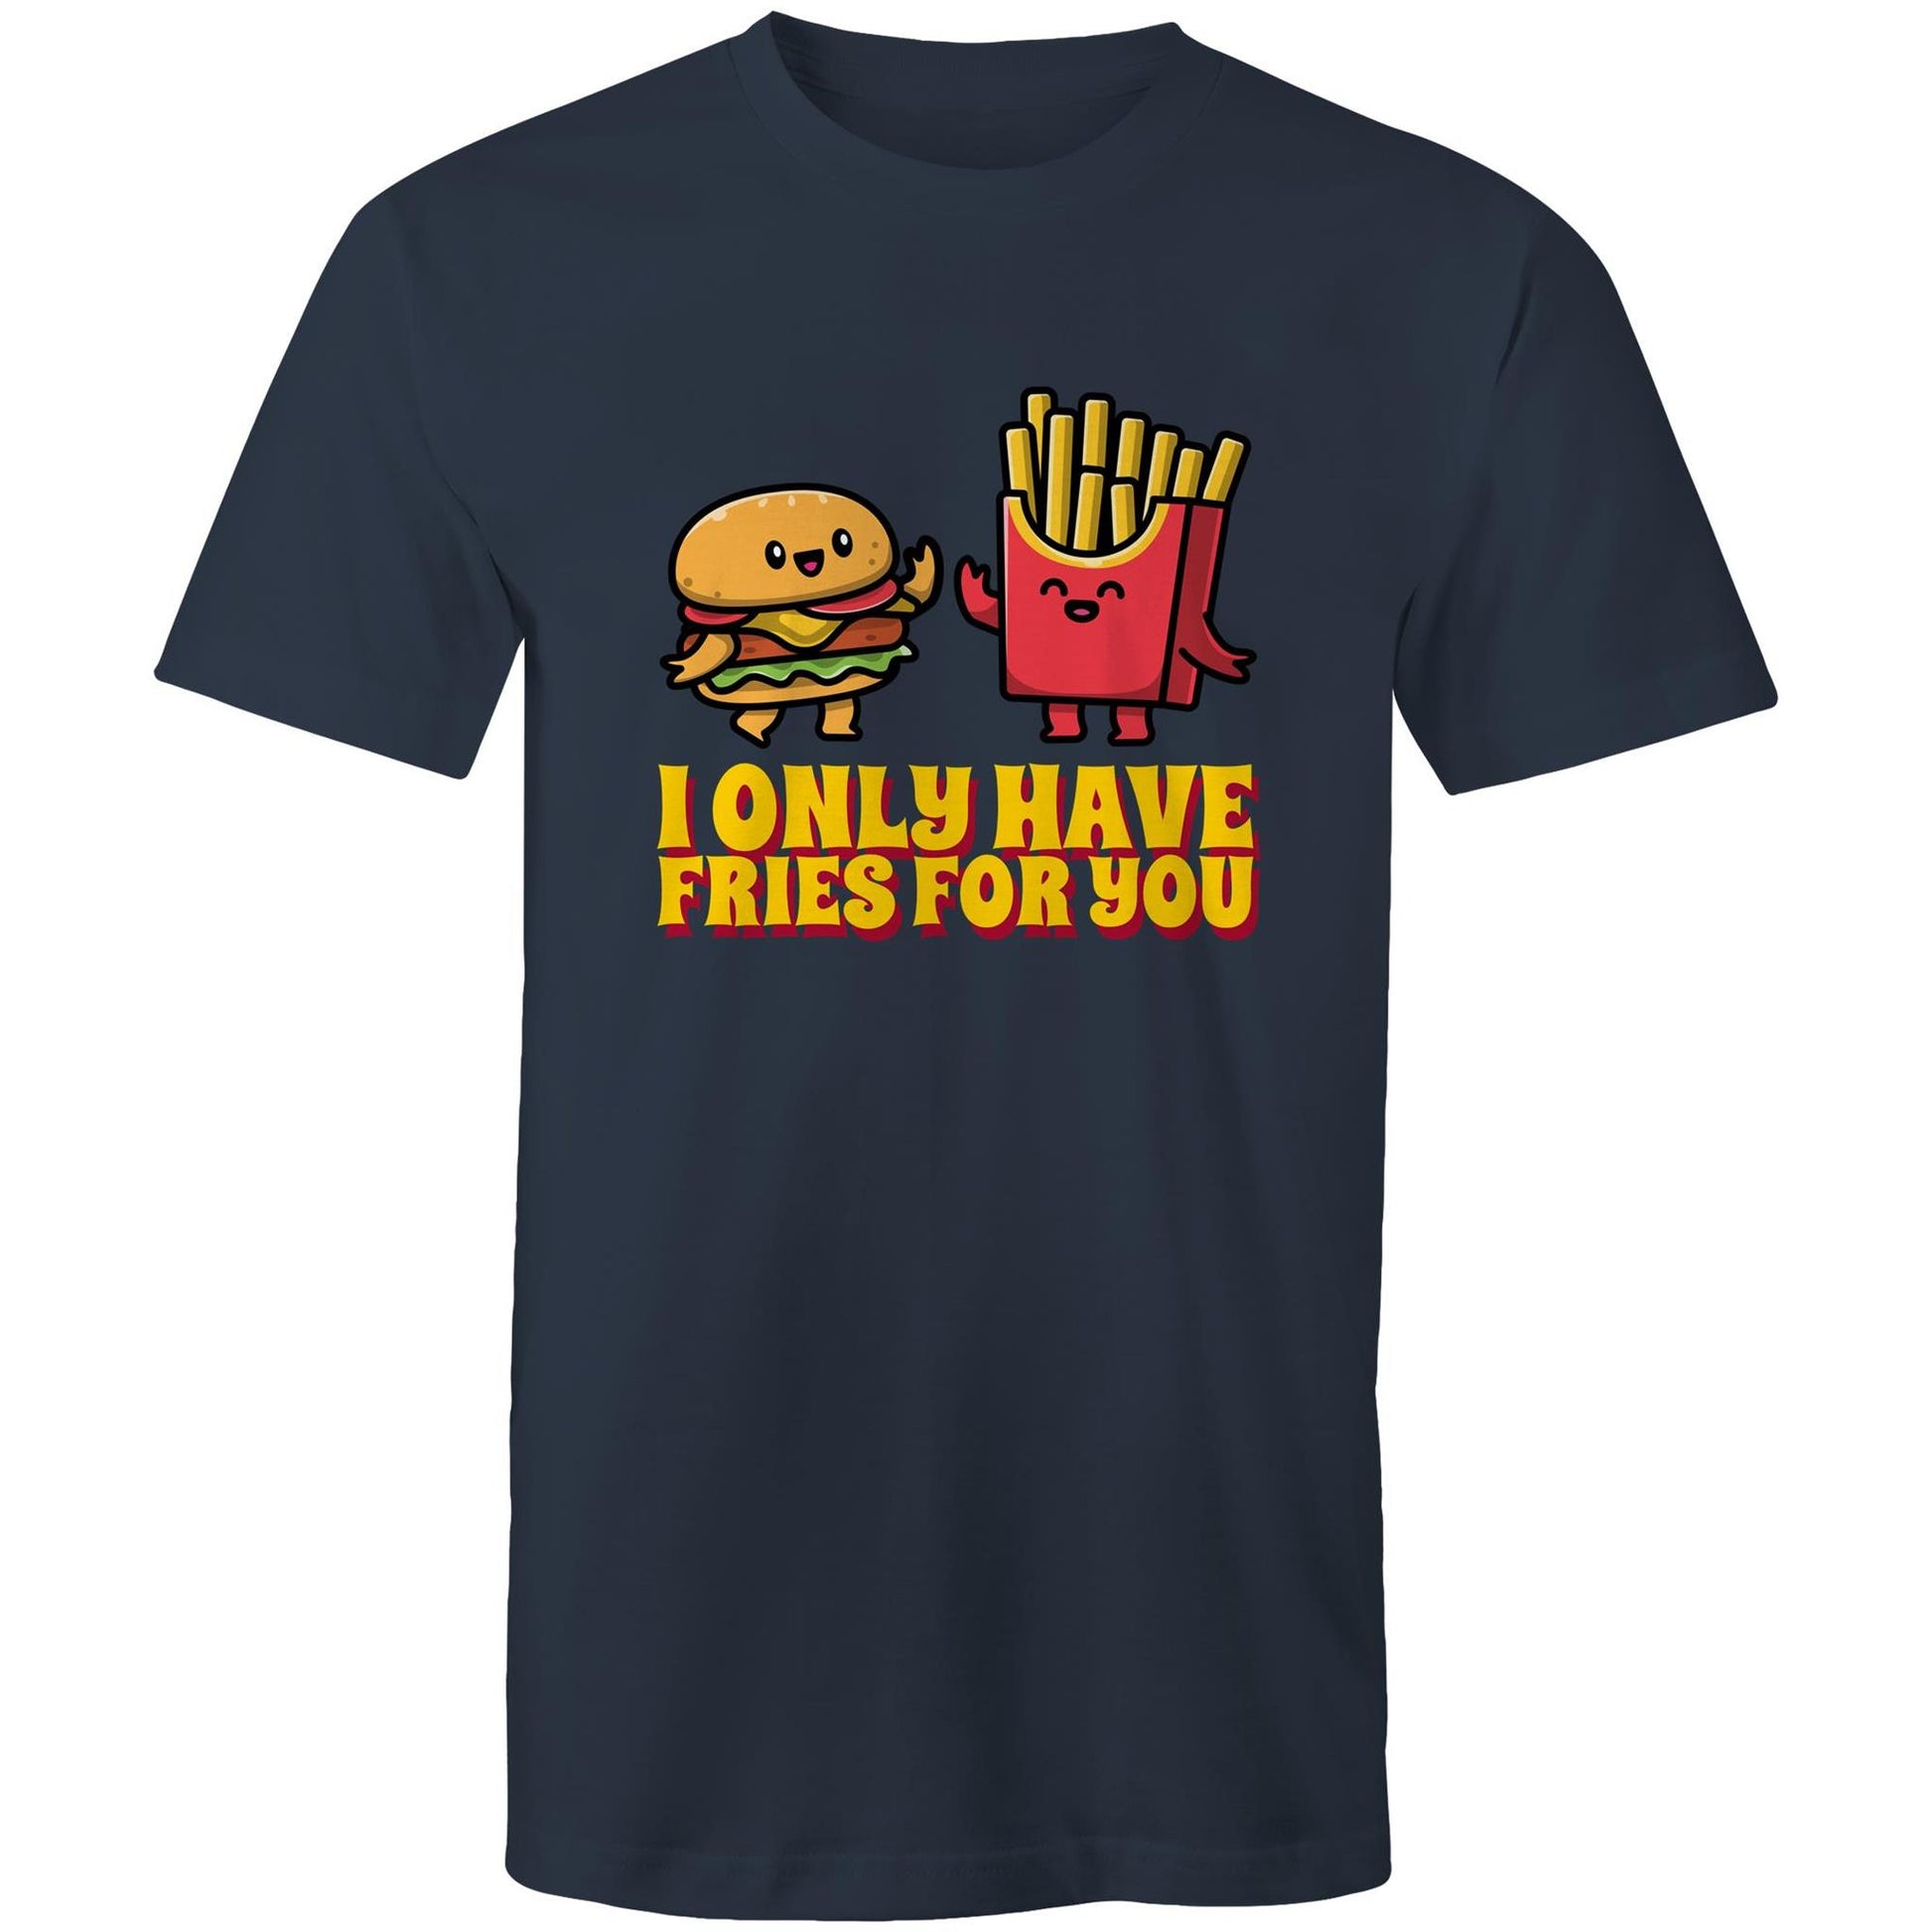 I Only Have Fries For You, Burger And Fries - Mens T-Shirt Navy Mens T-shirt